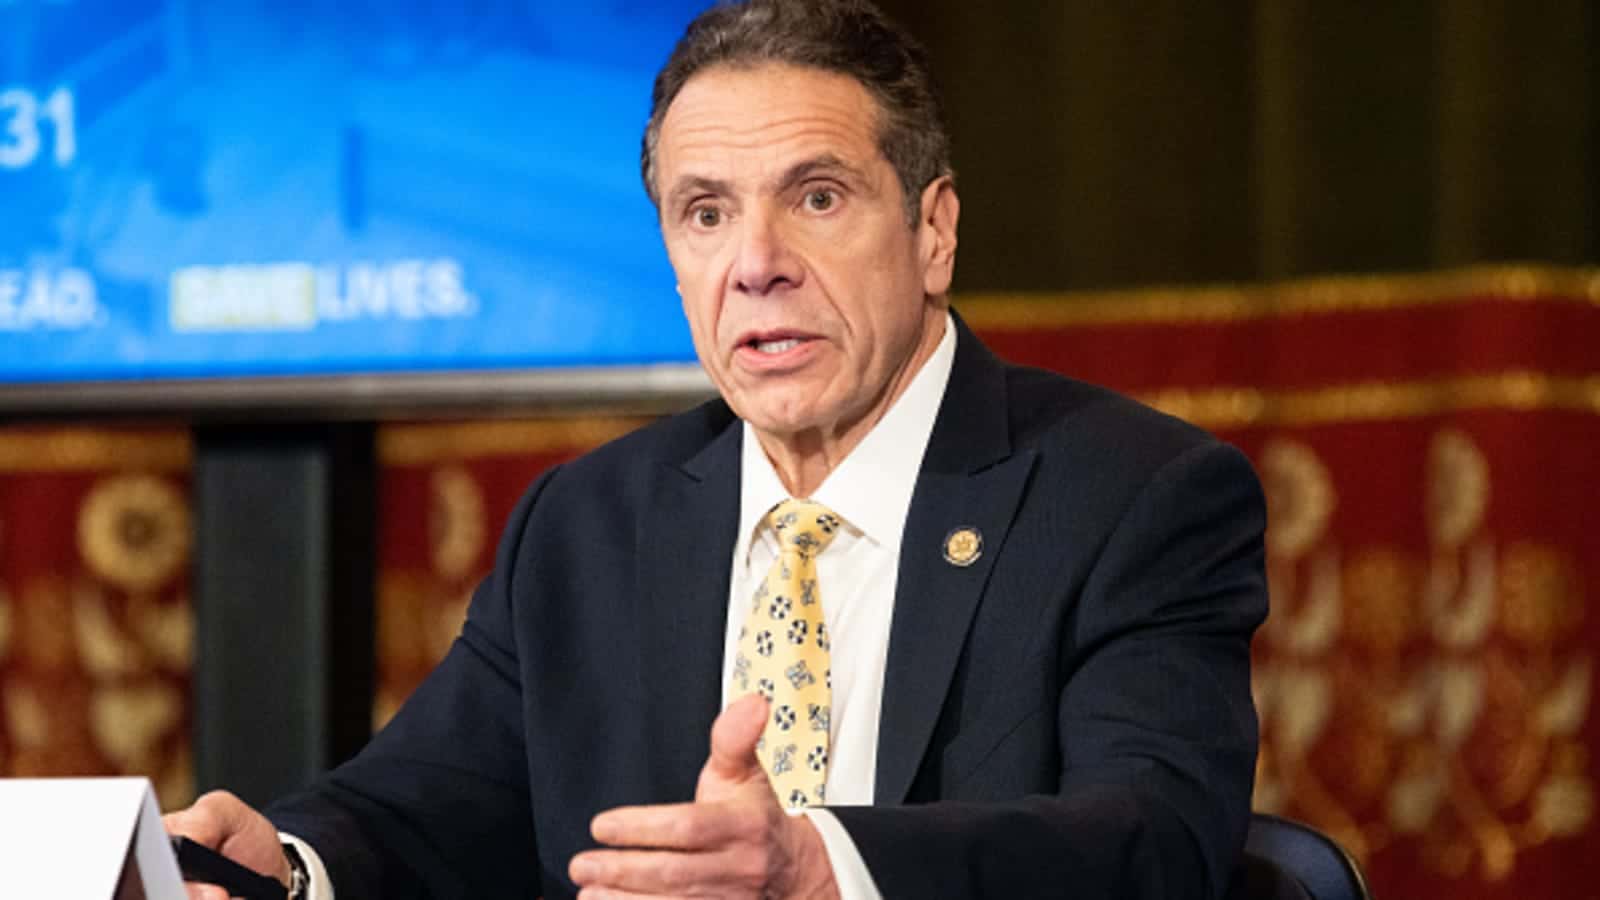 New York Governor Cuomo To Receive Emmy Award On Monday